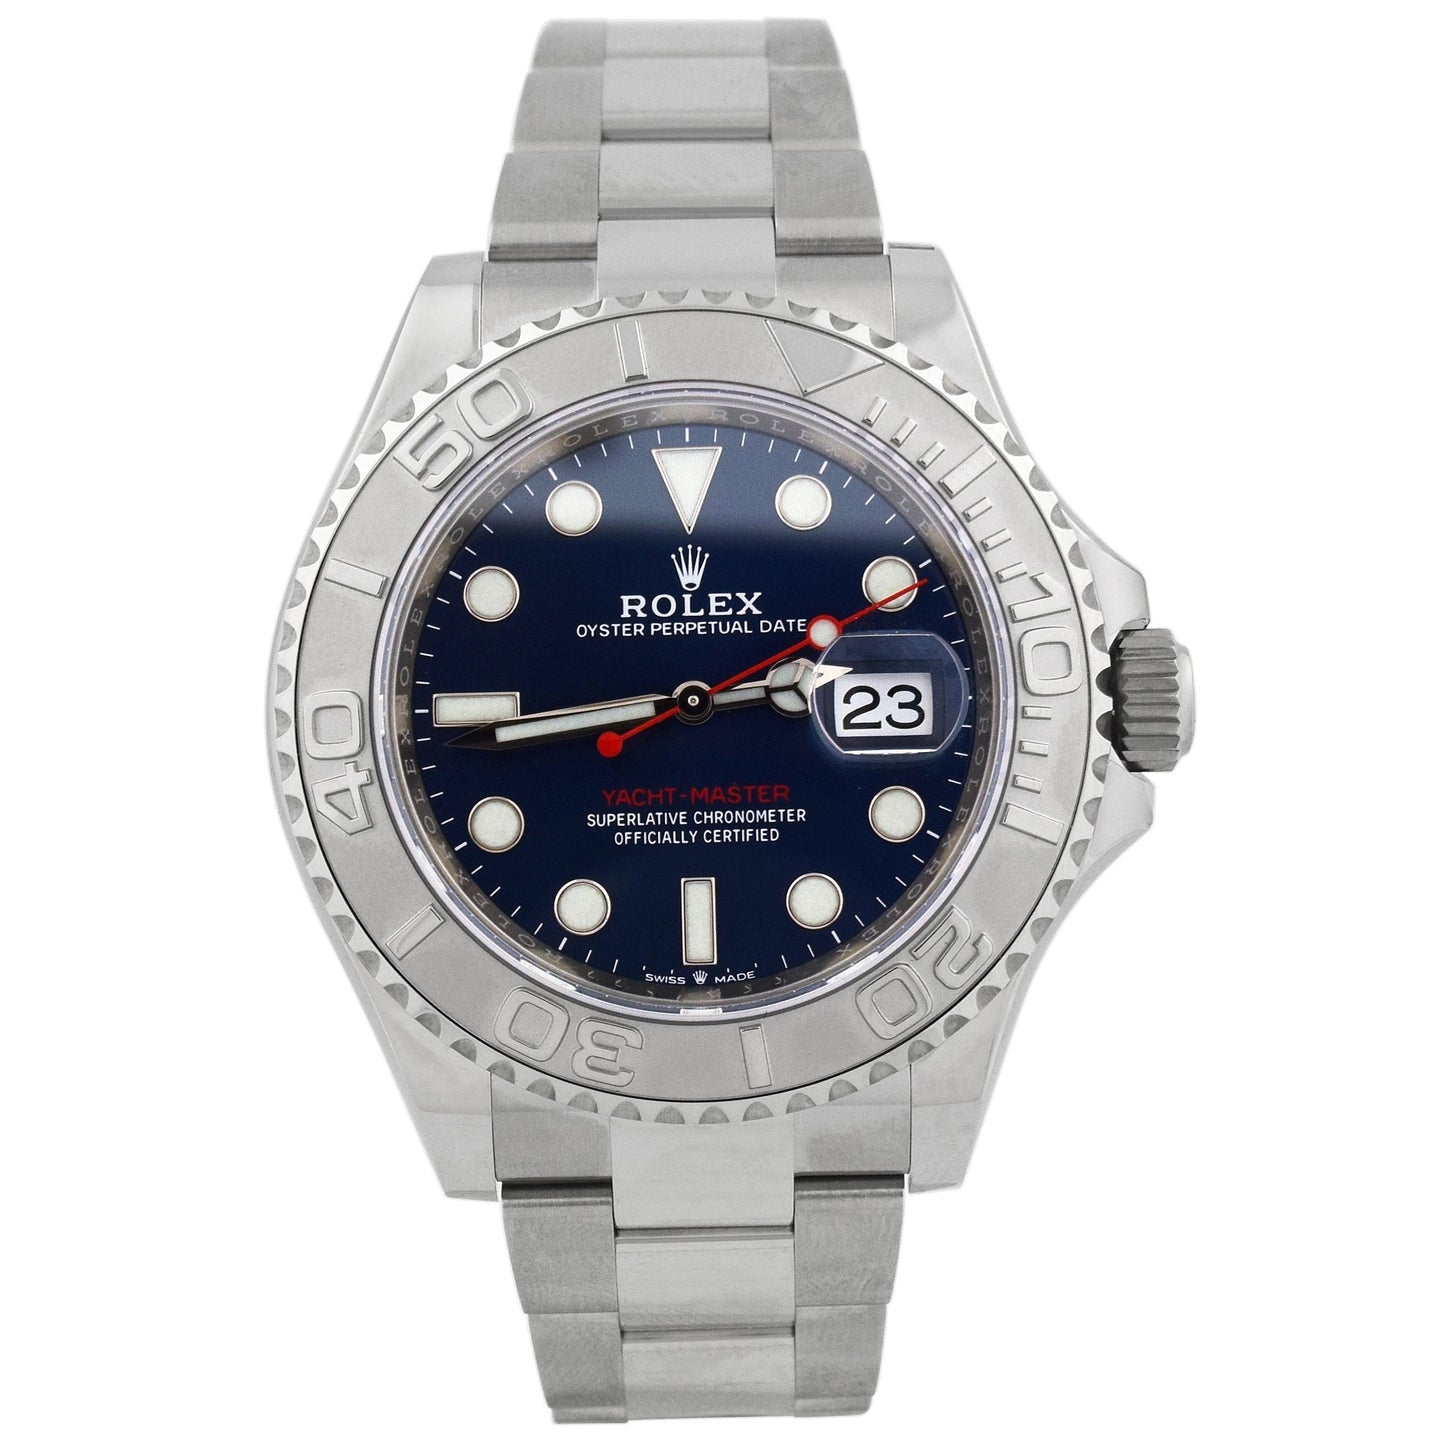 Rolex Yachtmaster Stainless Steel 40mm Blue Dot Dial Watch Reference #: 126622 - Happy Jewelers Fine Jewelry Lifetime Warranty